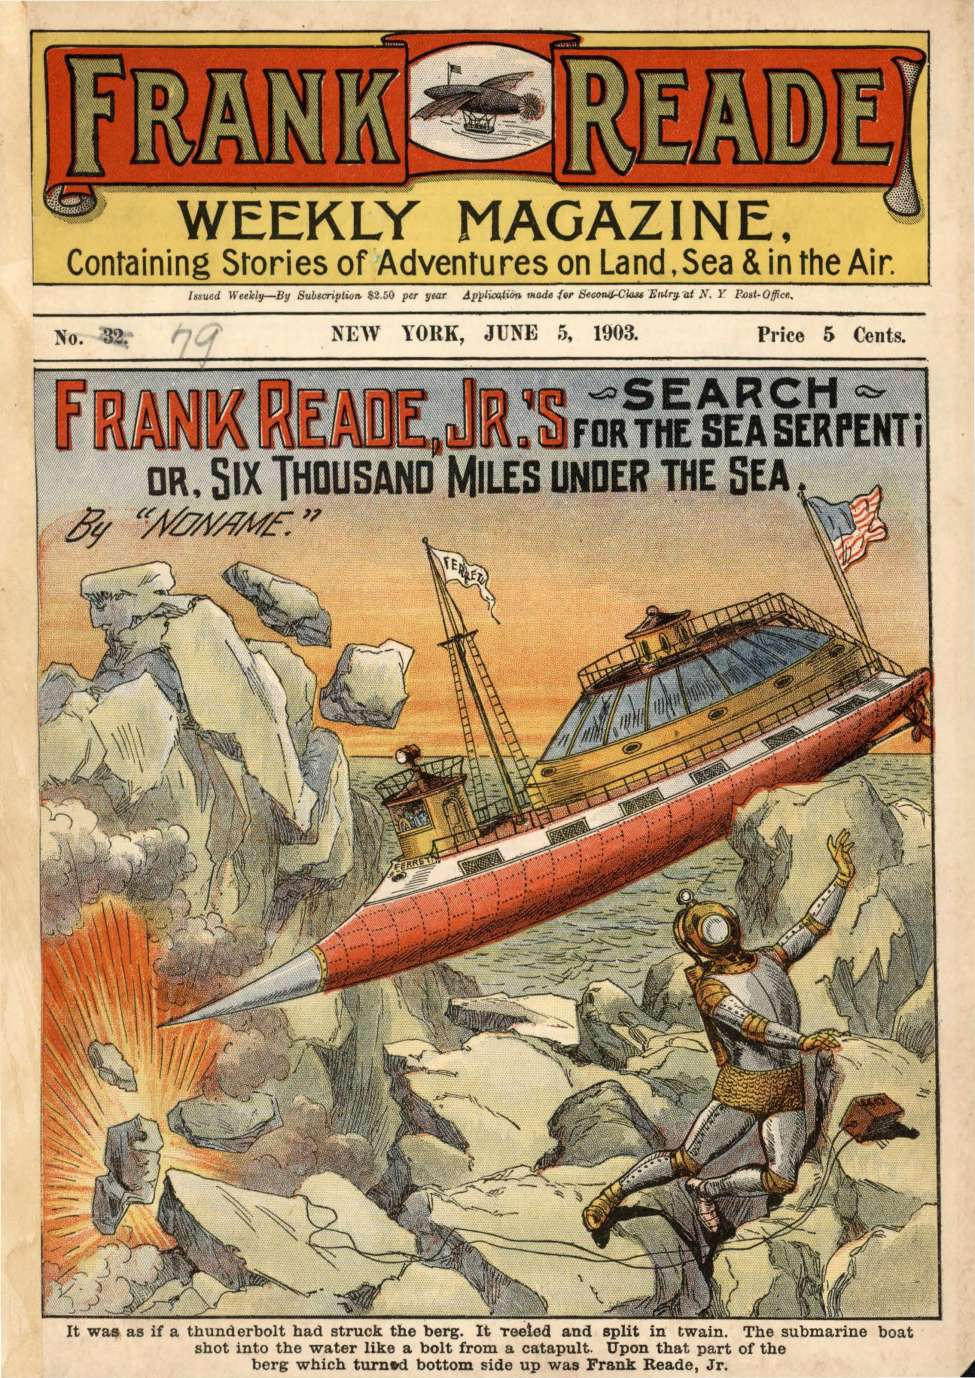 Book Cover For v1 32 - Frank Reade, Jr.'s Search for the Sea Serpent